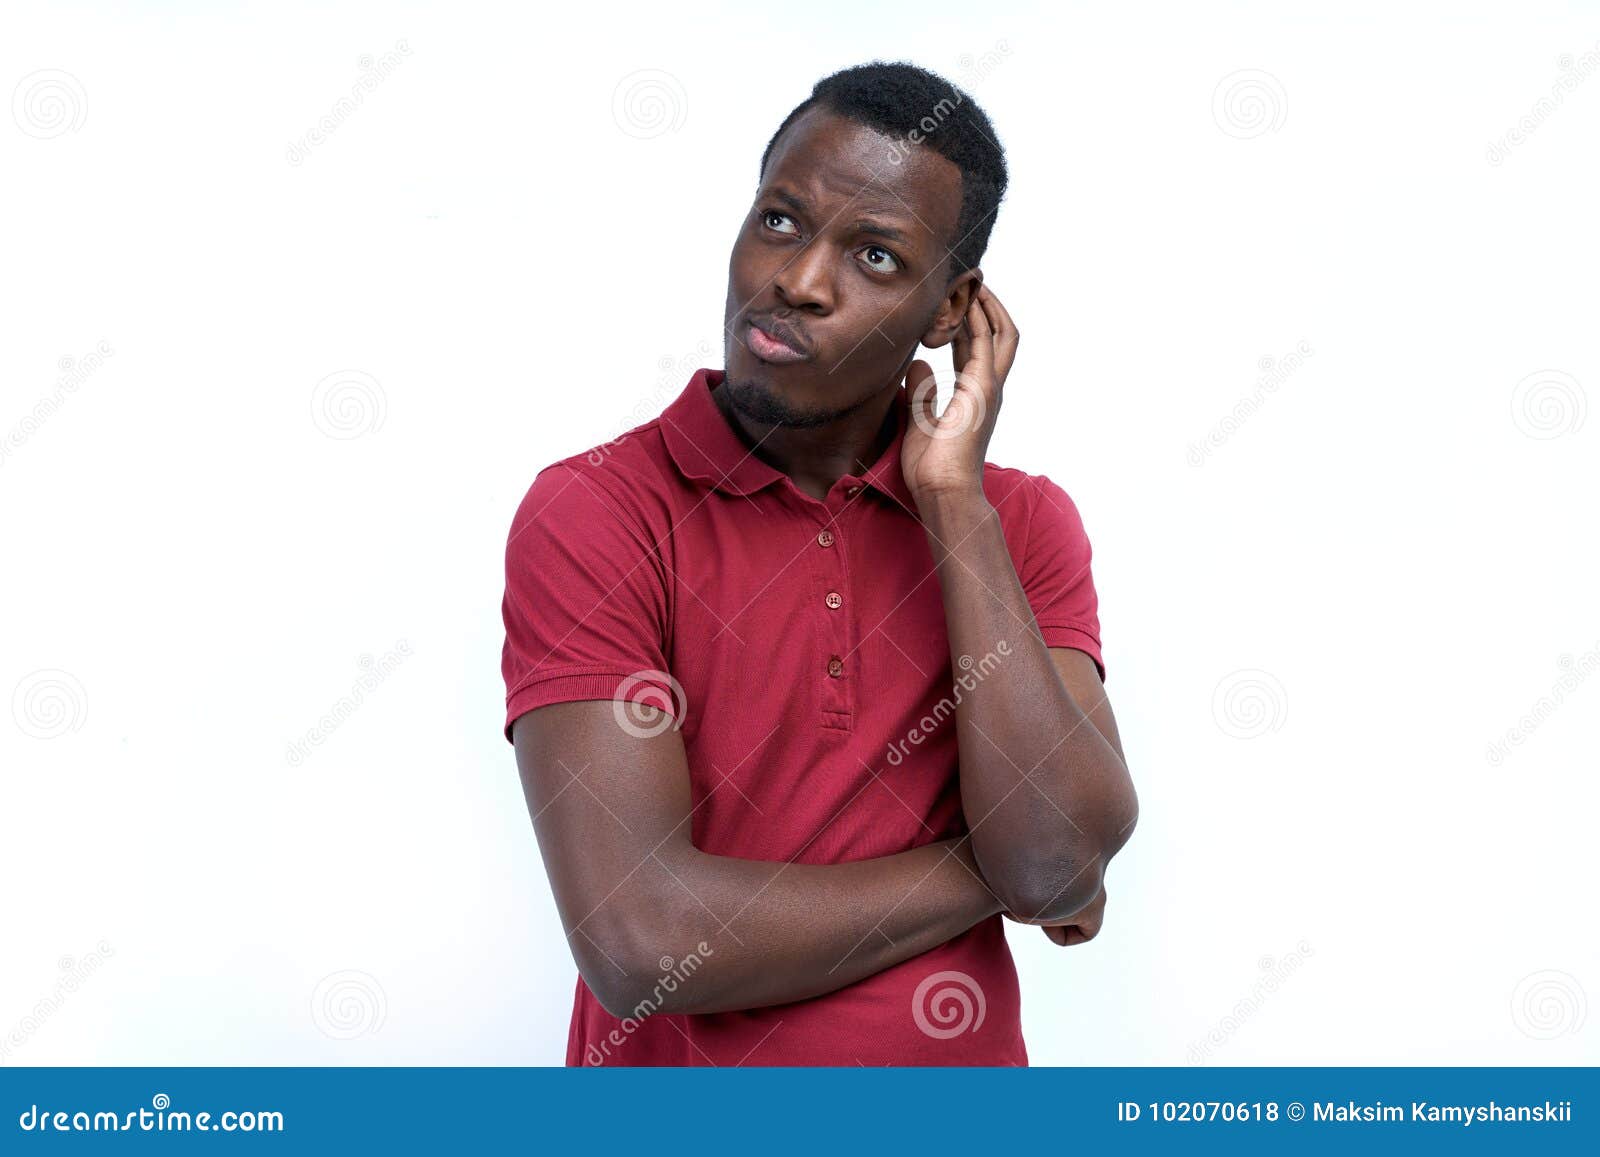 a young black man with a thoughtful expression, scratching his h